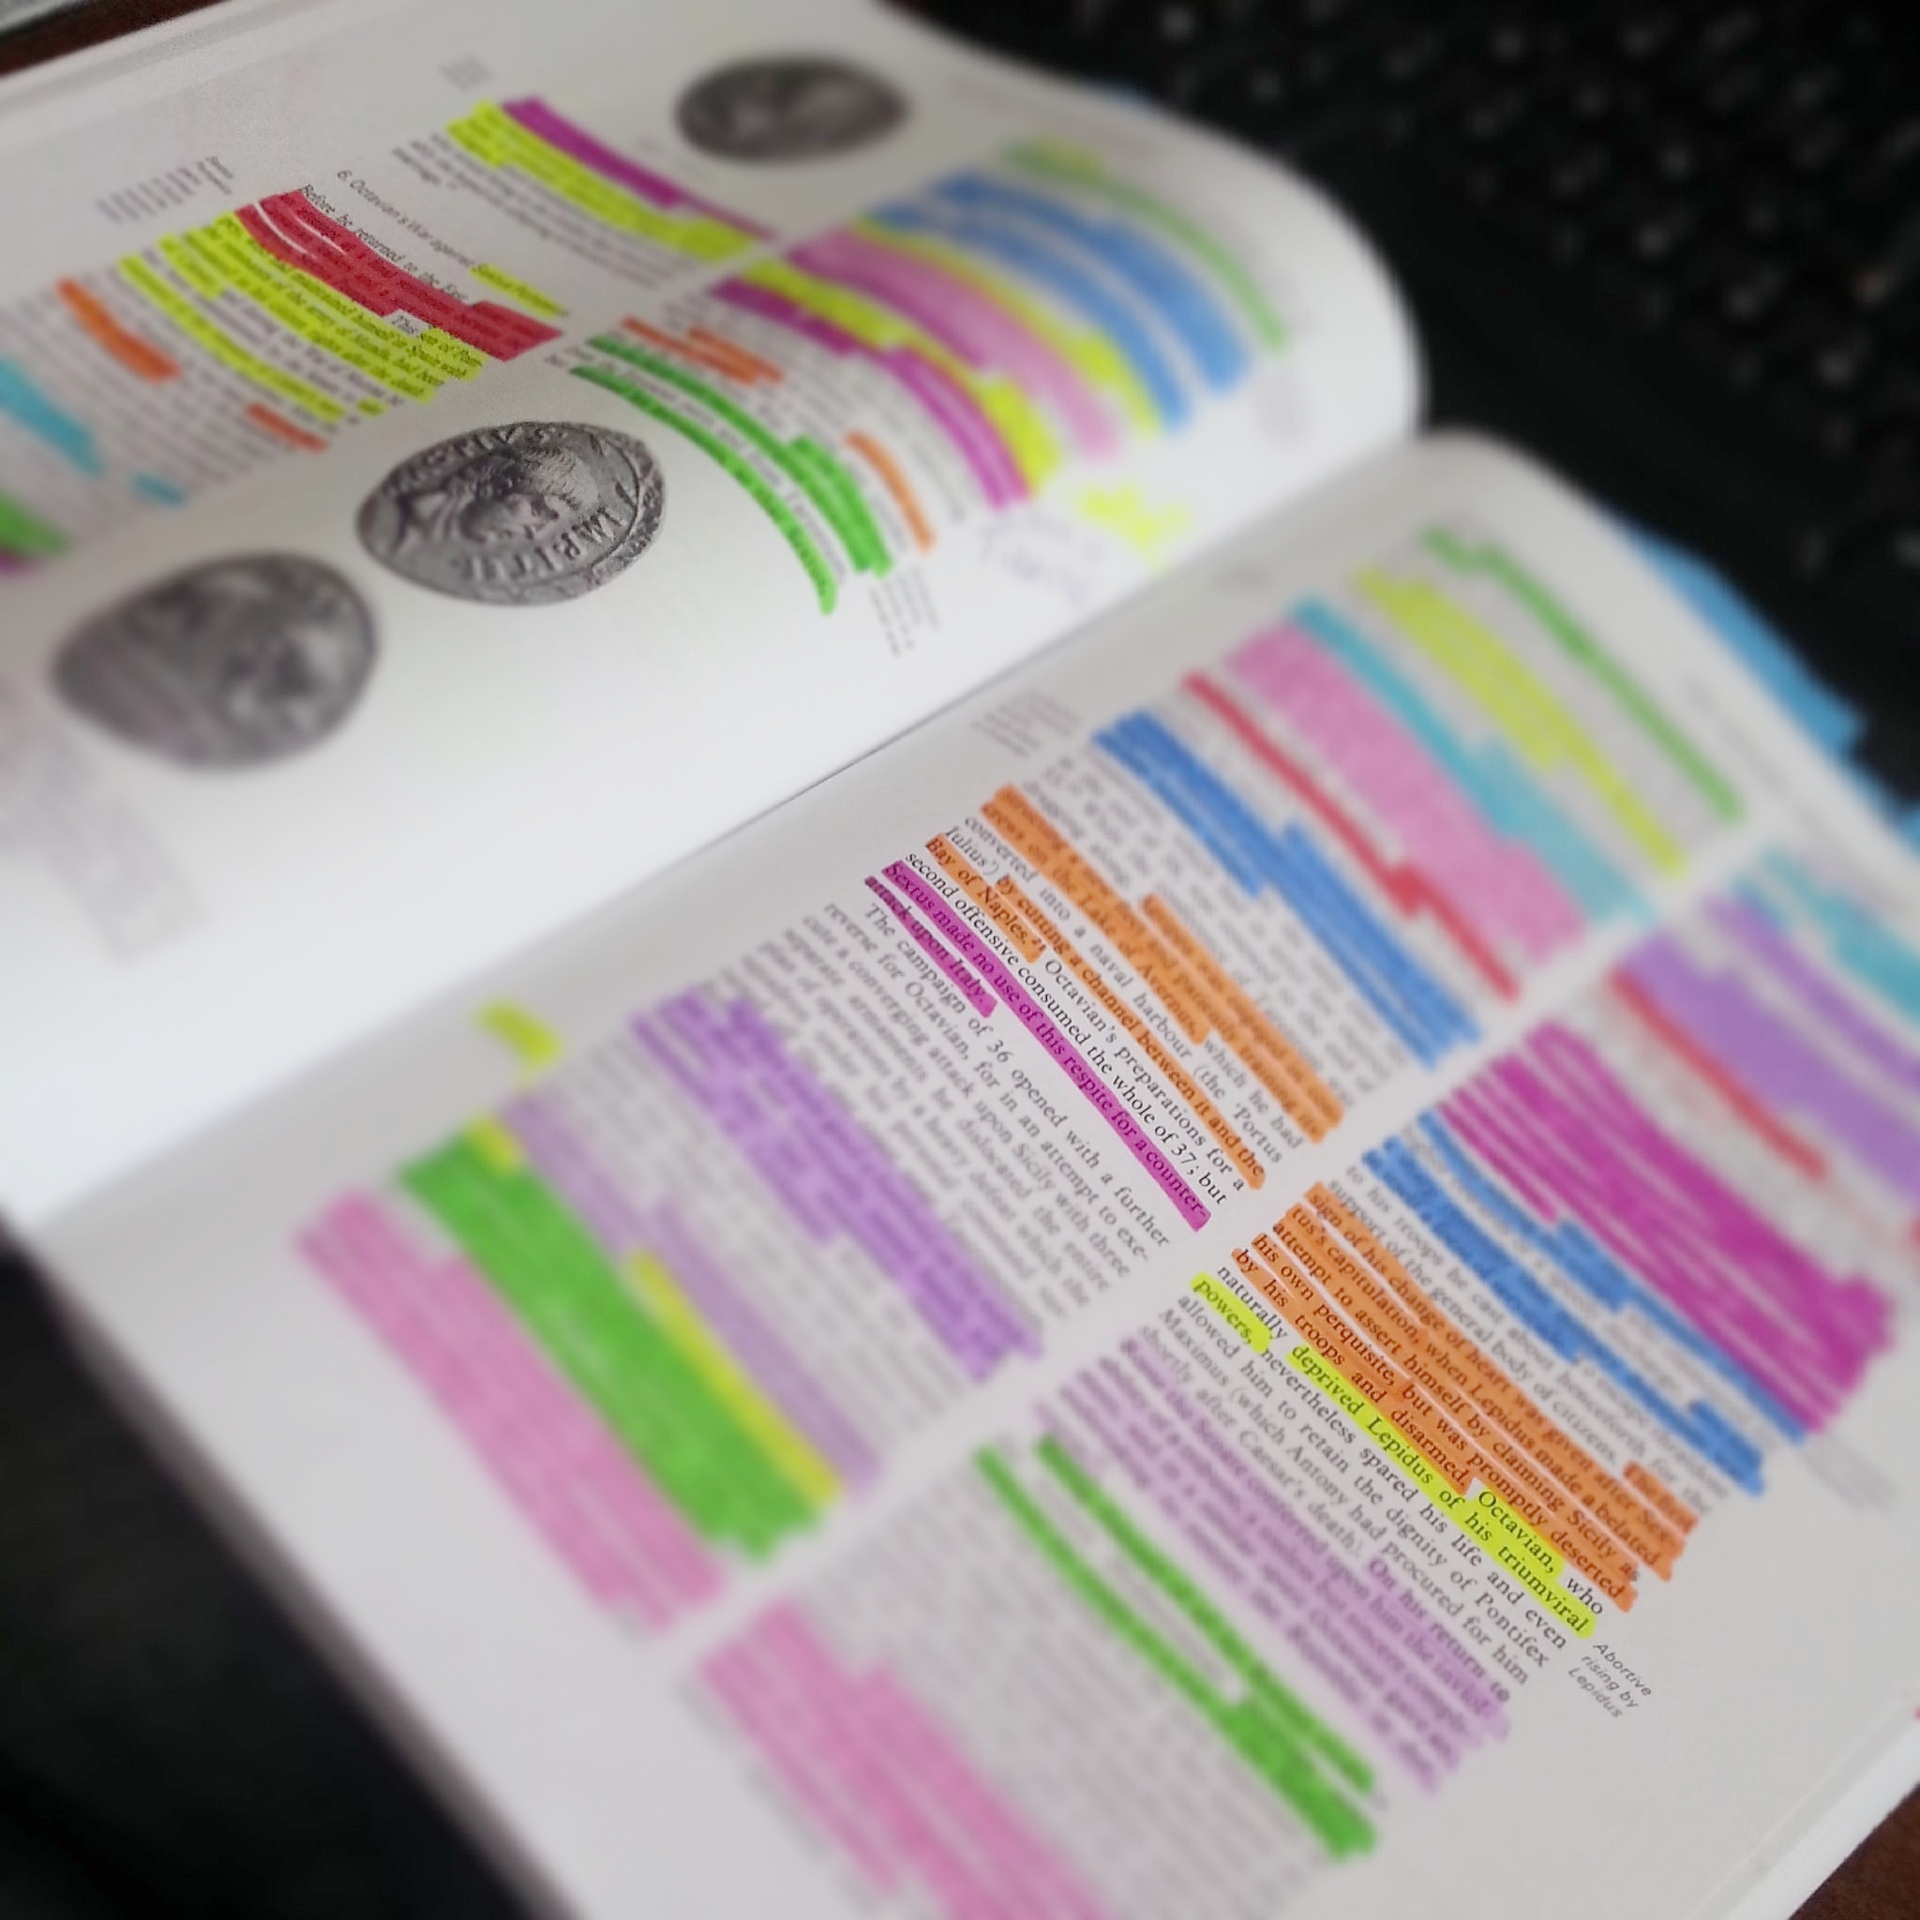 MythBusters: Highlighting helps me study